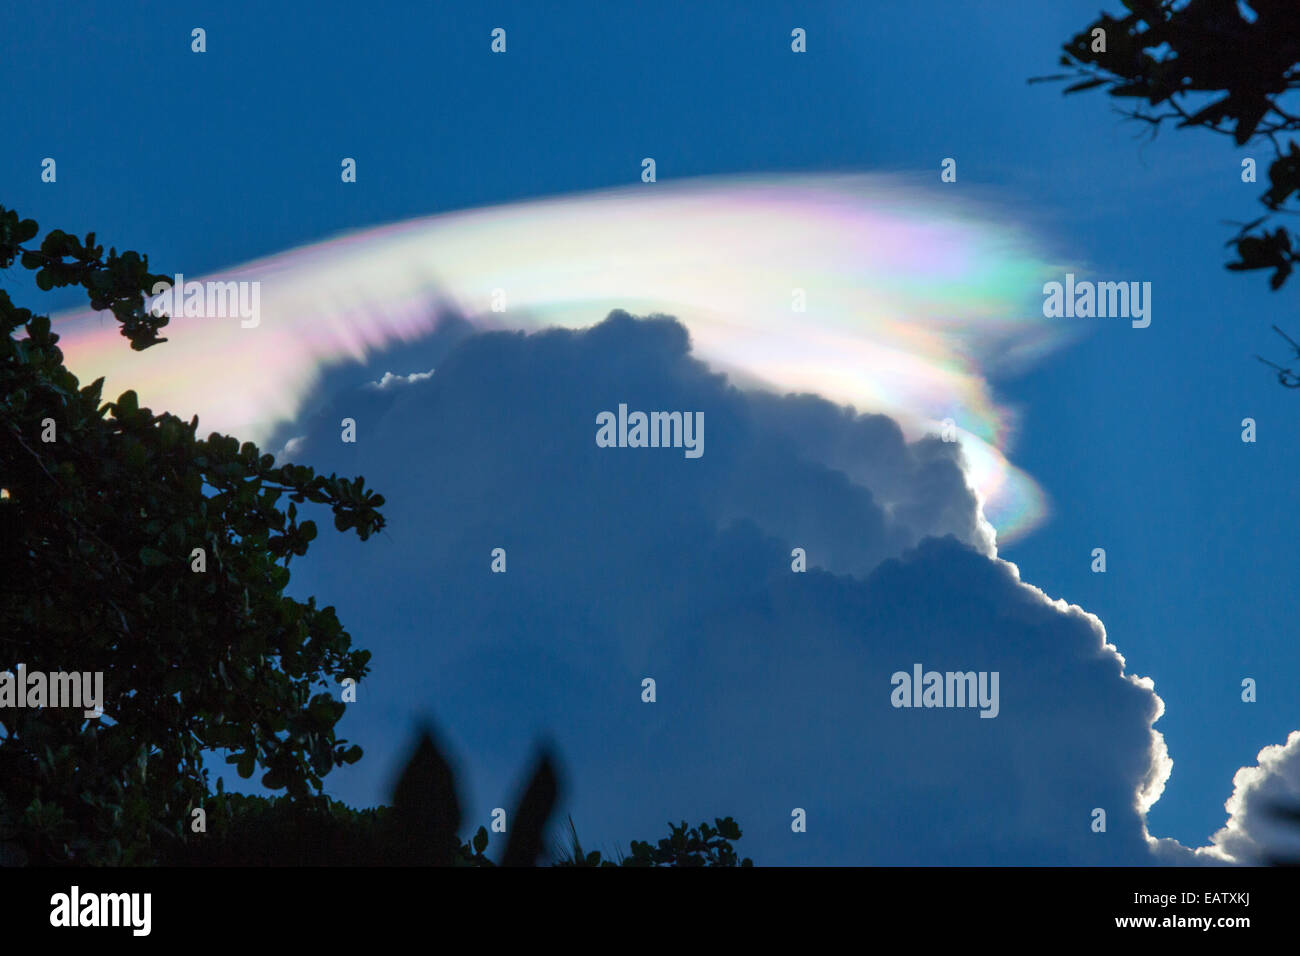 An unusual and colorful cloud formation in the late afternoon sky. Stock Photo